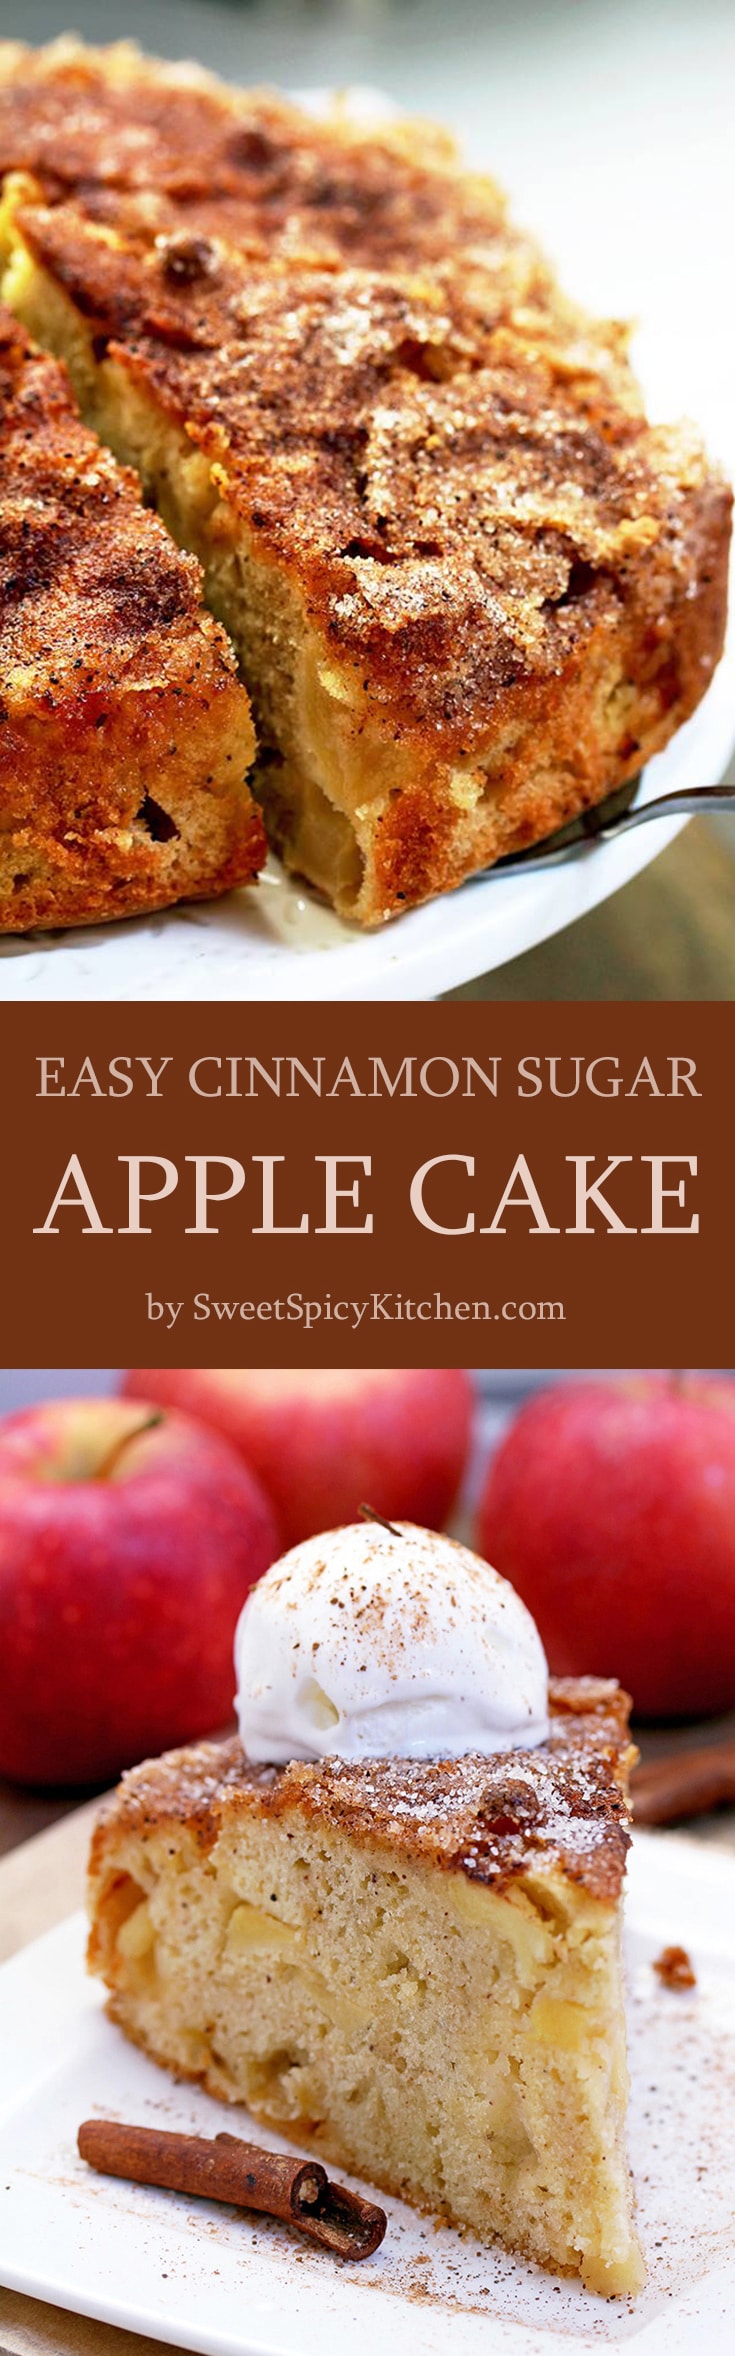 Easy Cinnamon Sugar Apple Cake – a soft cake filled with juicy apples, topped with cinnamon and sugar. This is a real fall treat